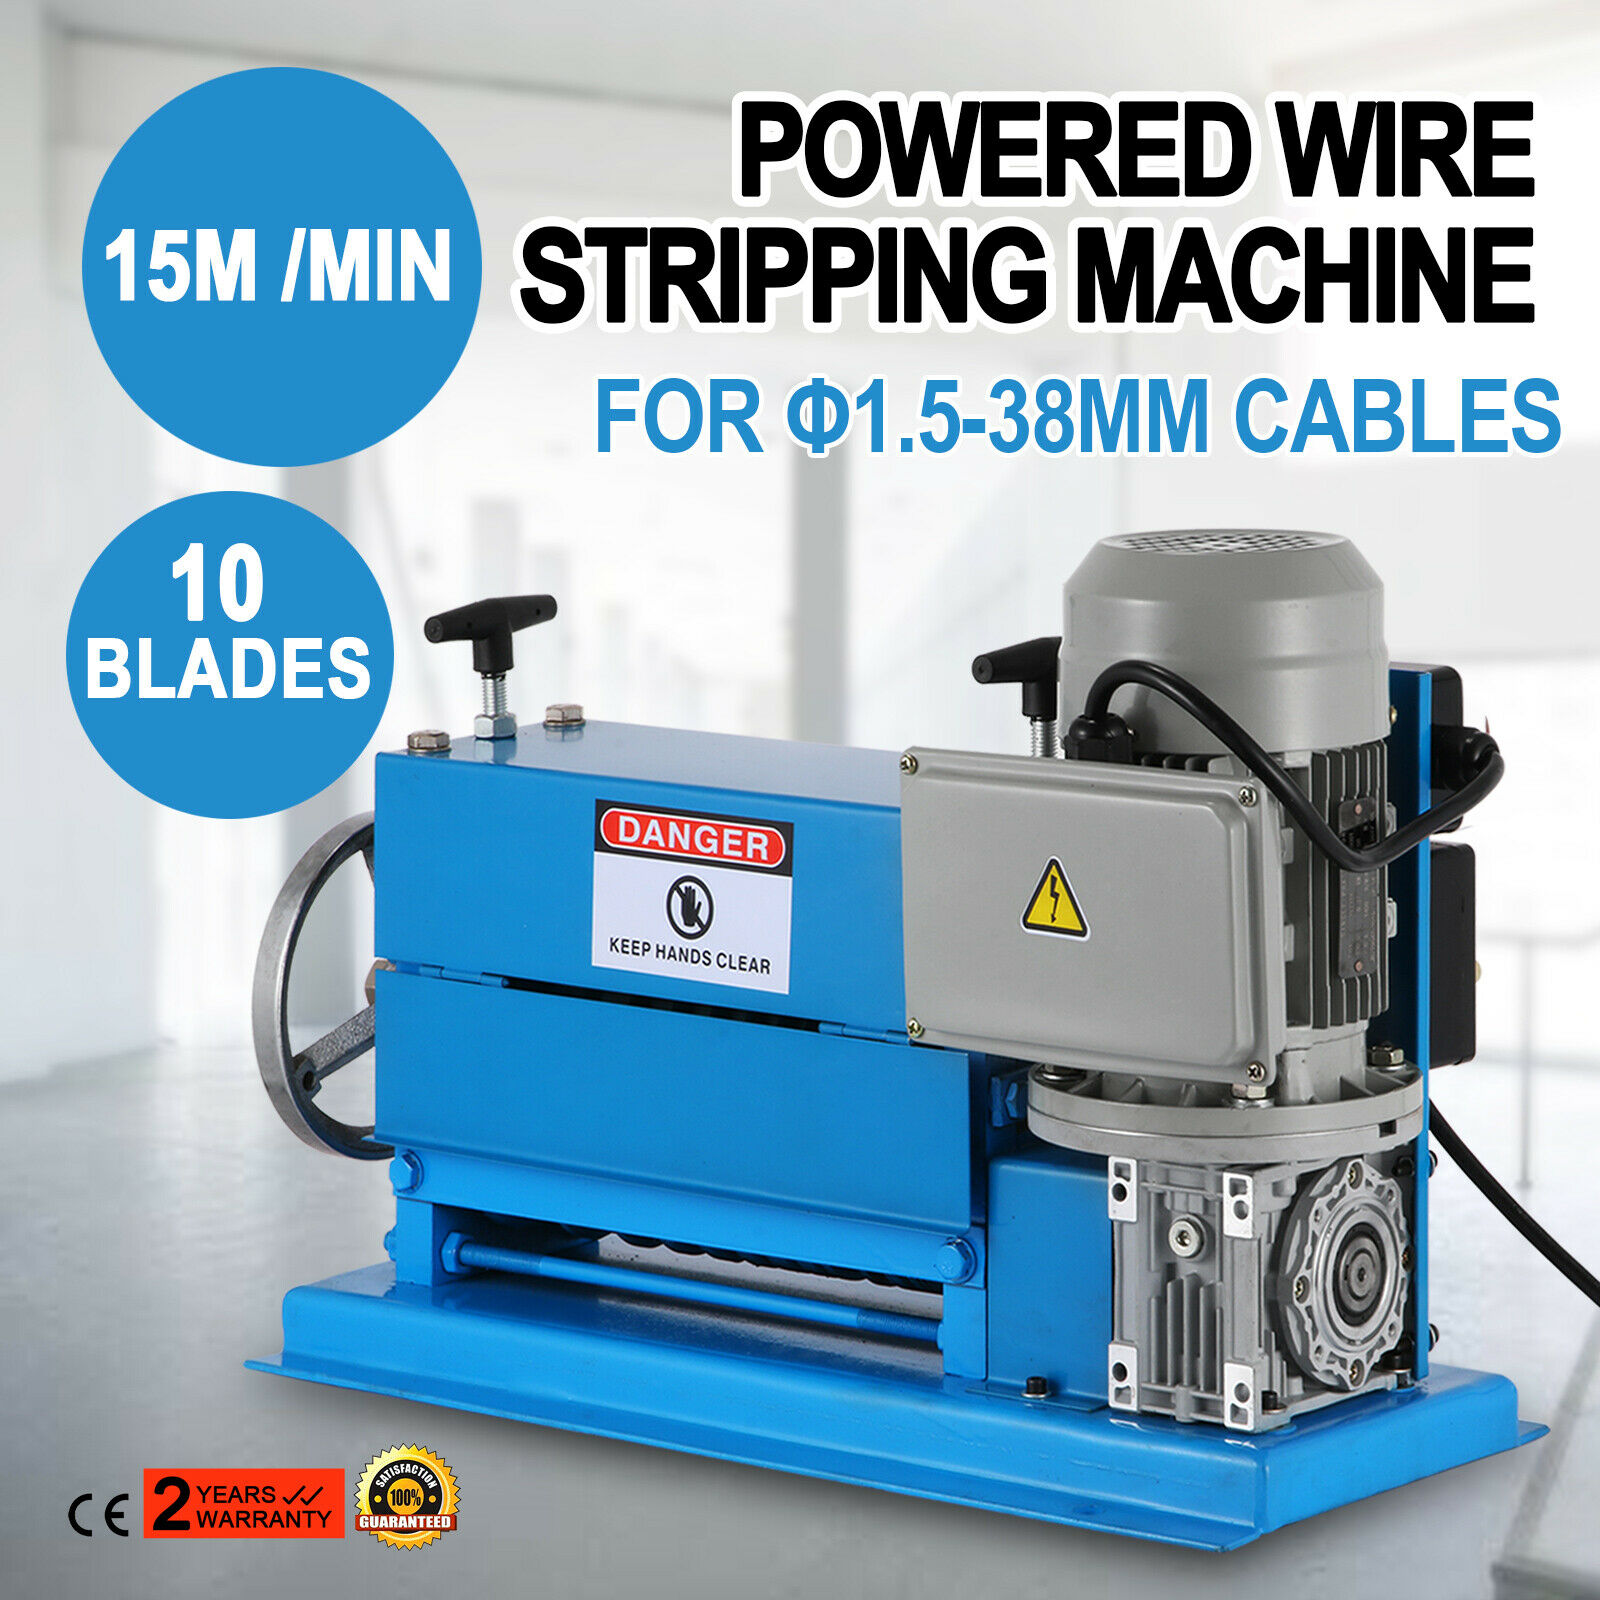 Portable Powered Electric Wire Stripping Machine Scrap Cable Stripper 220v to Europe